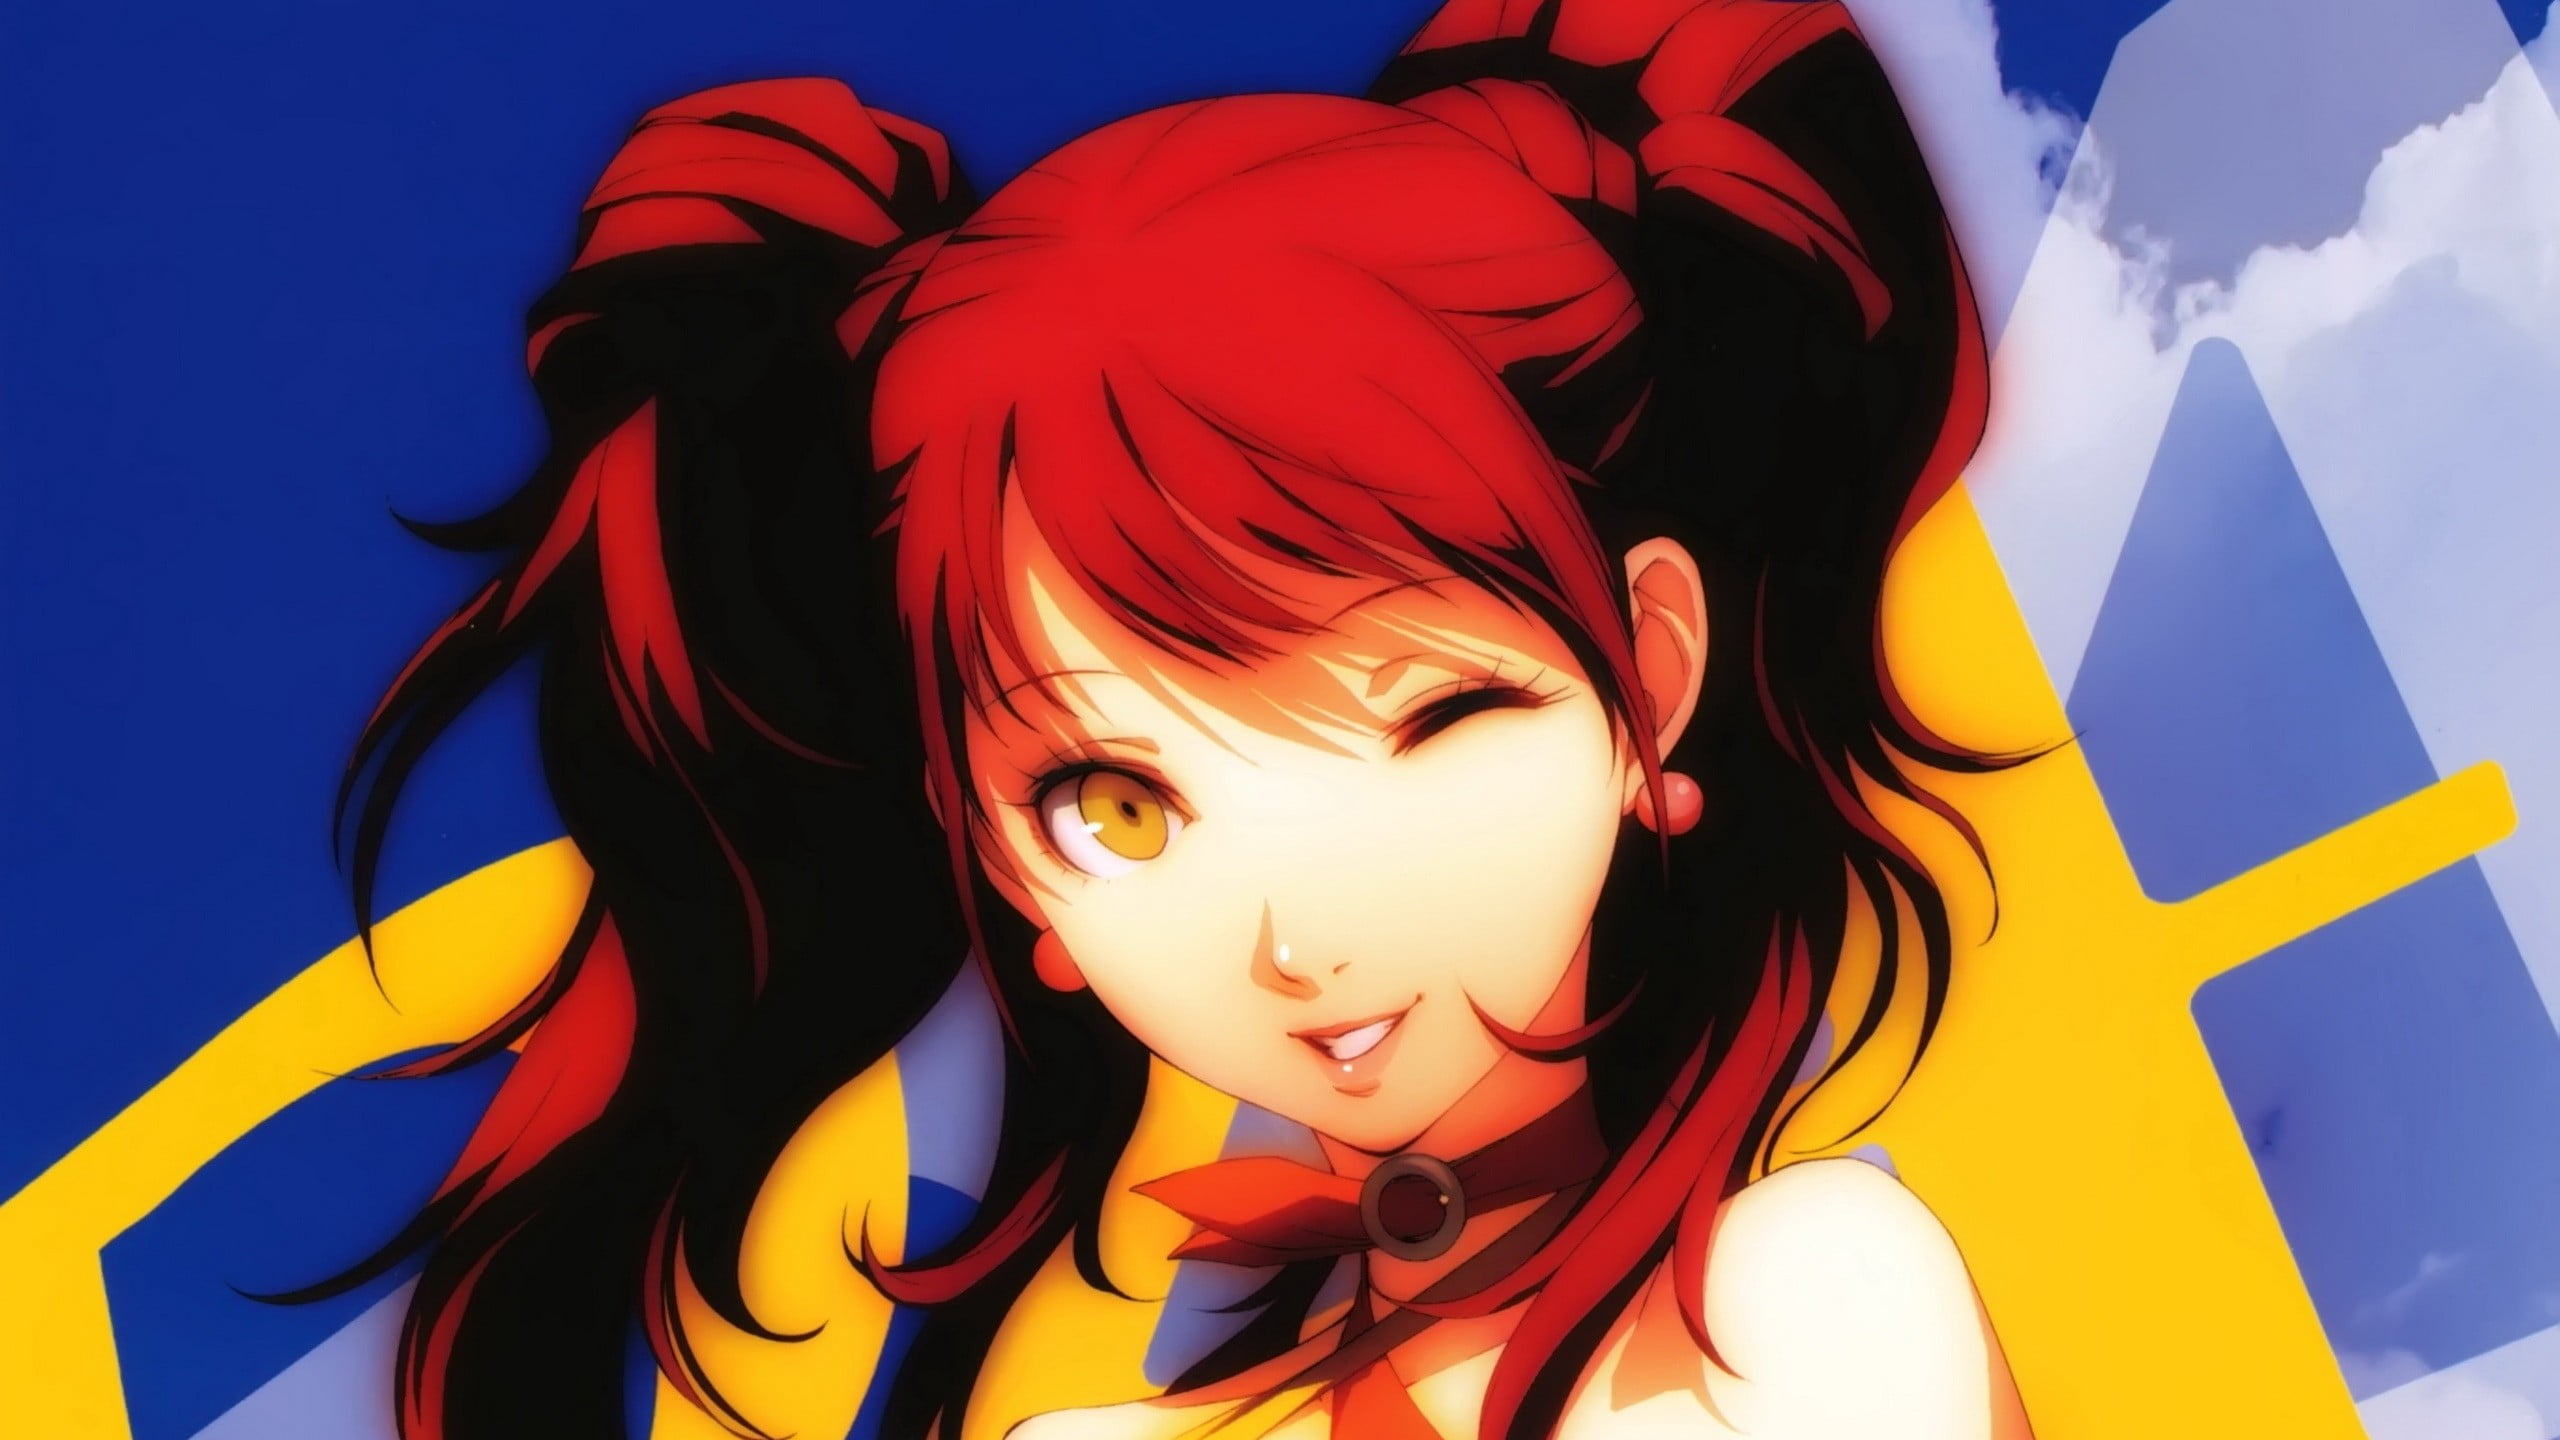 red haired female anime character, video games, anime girls, winking